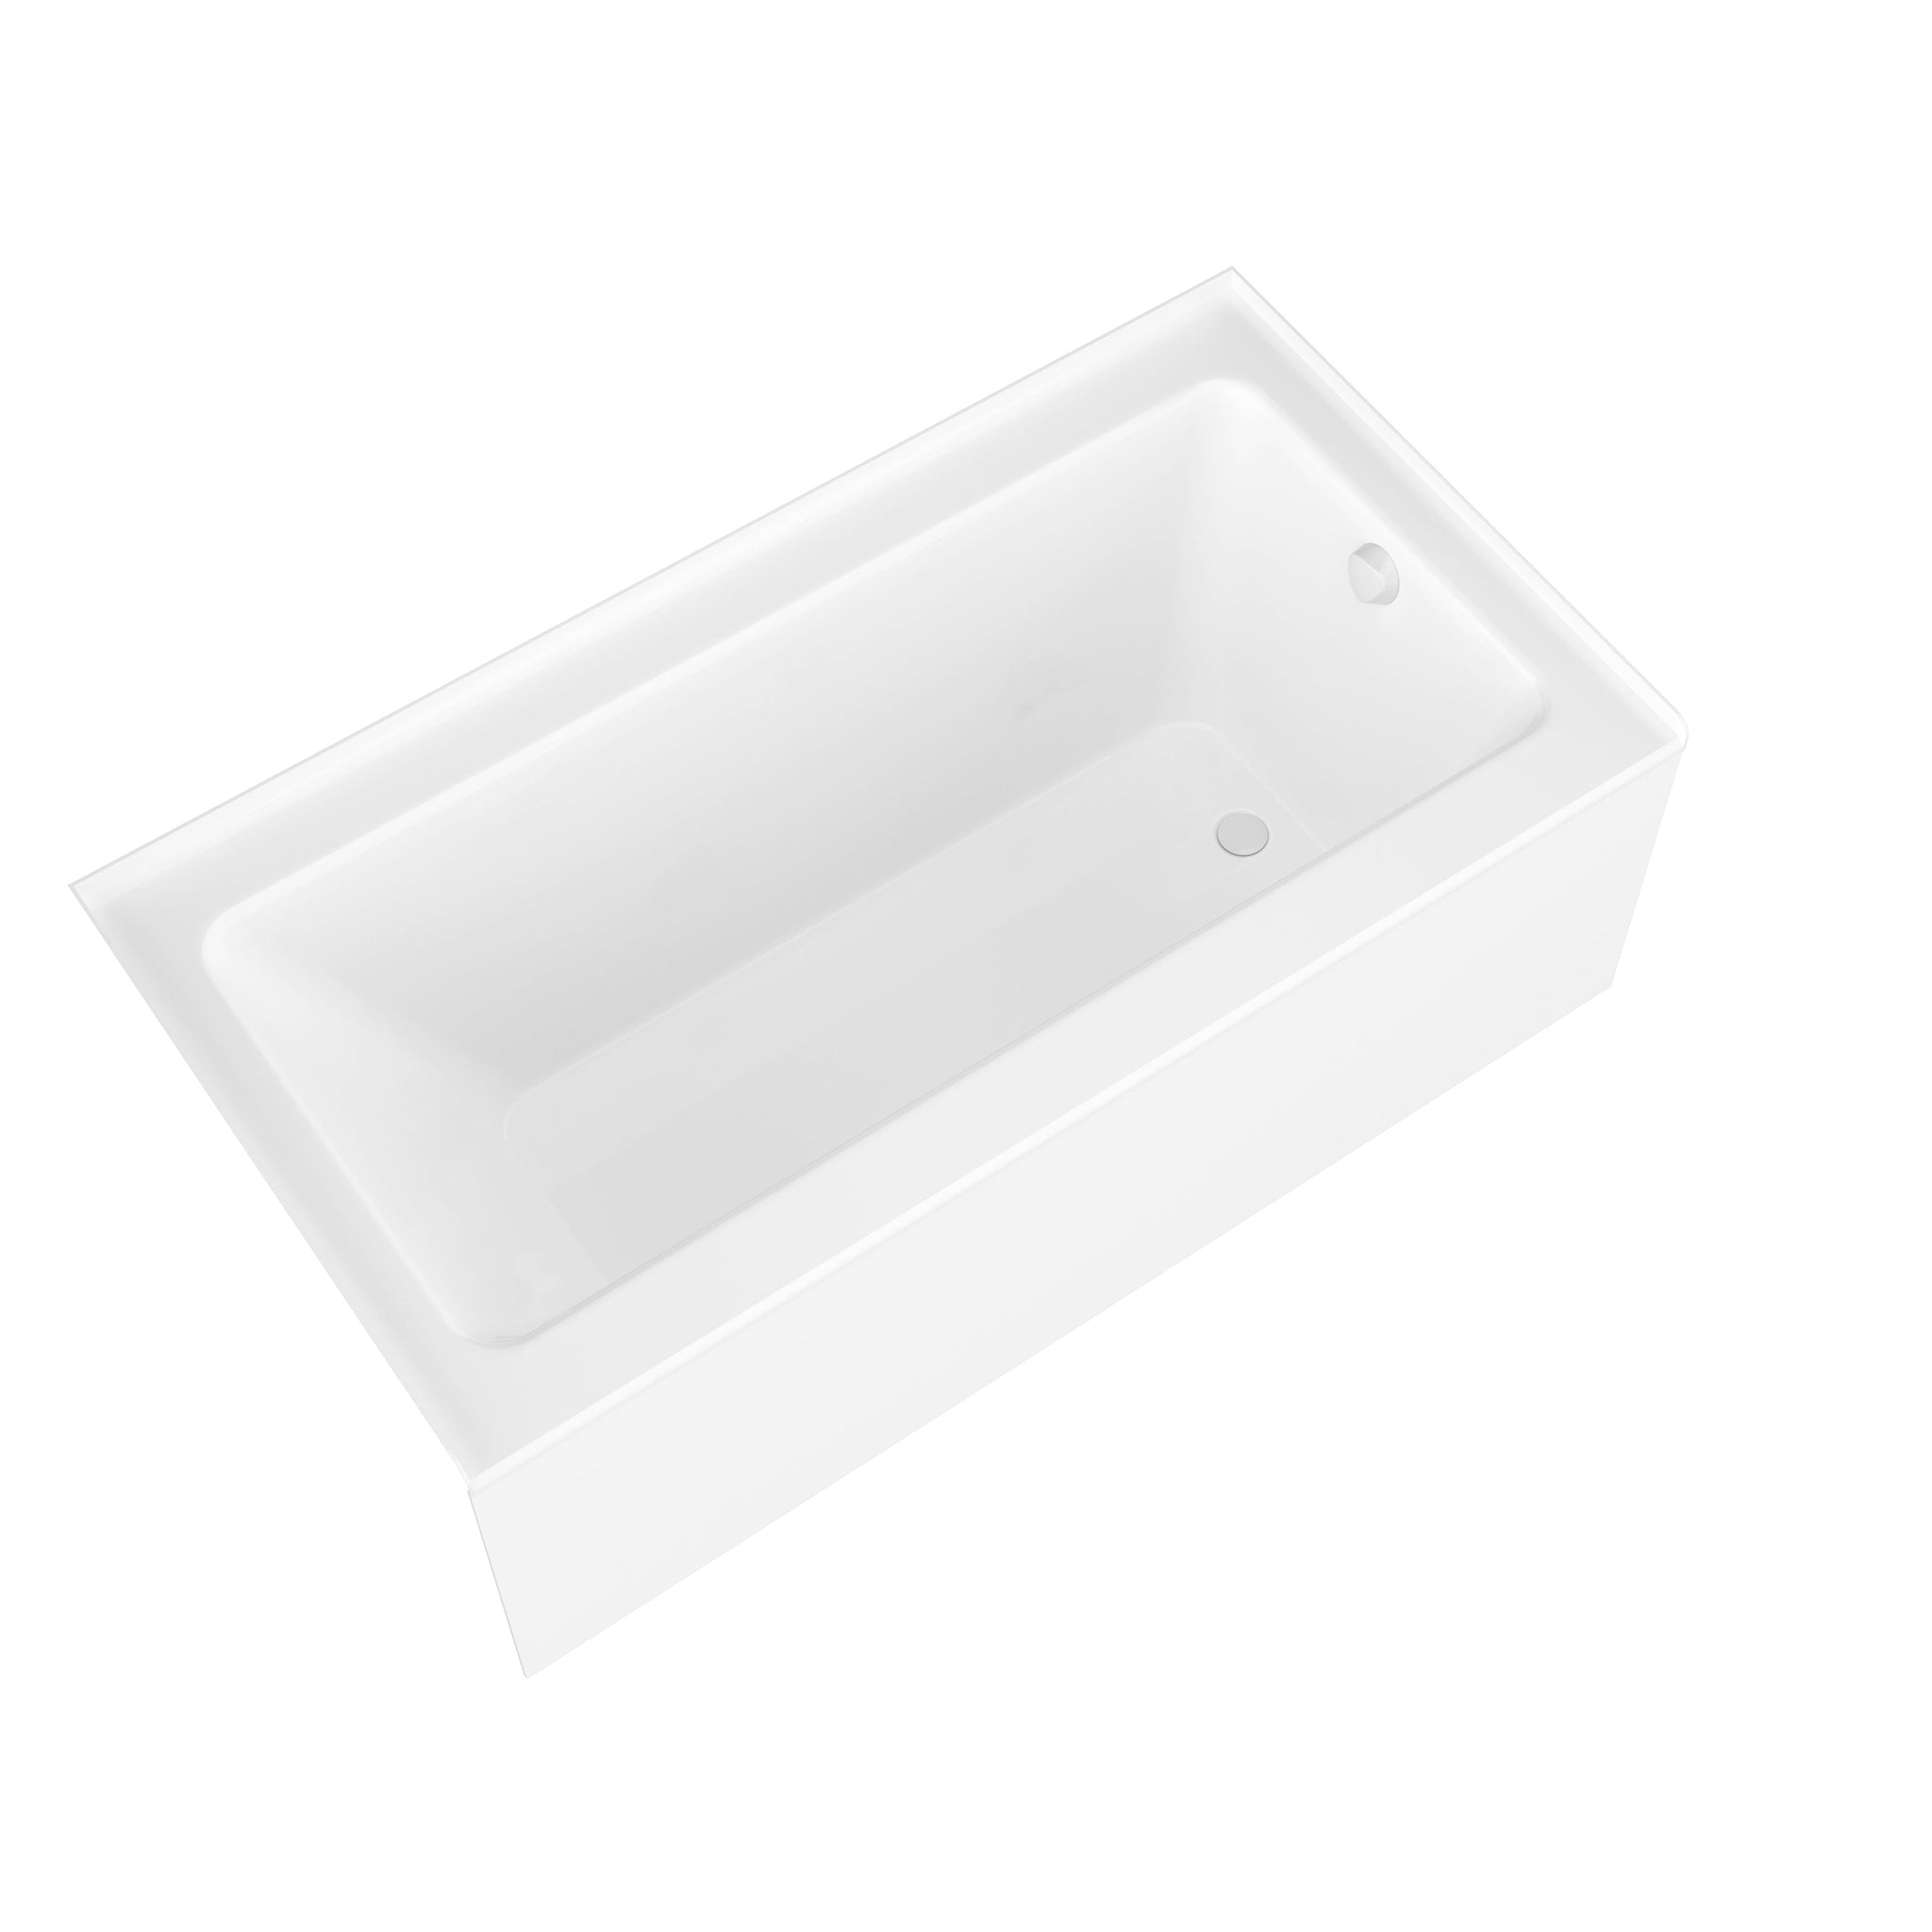 Alcove Tub Pop-Up Drain & Overflow Cover - Polished Nickel | Signature Hardware